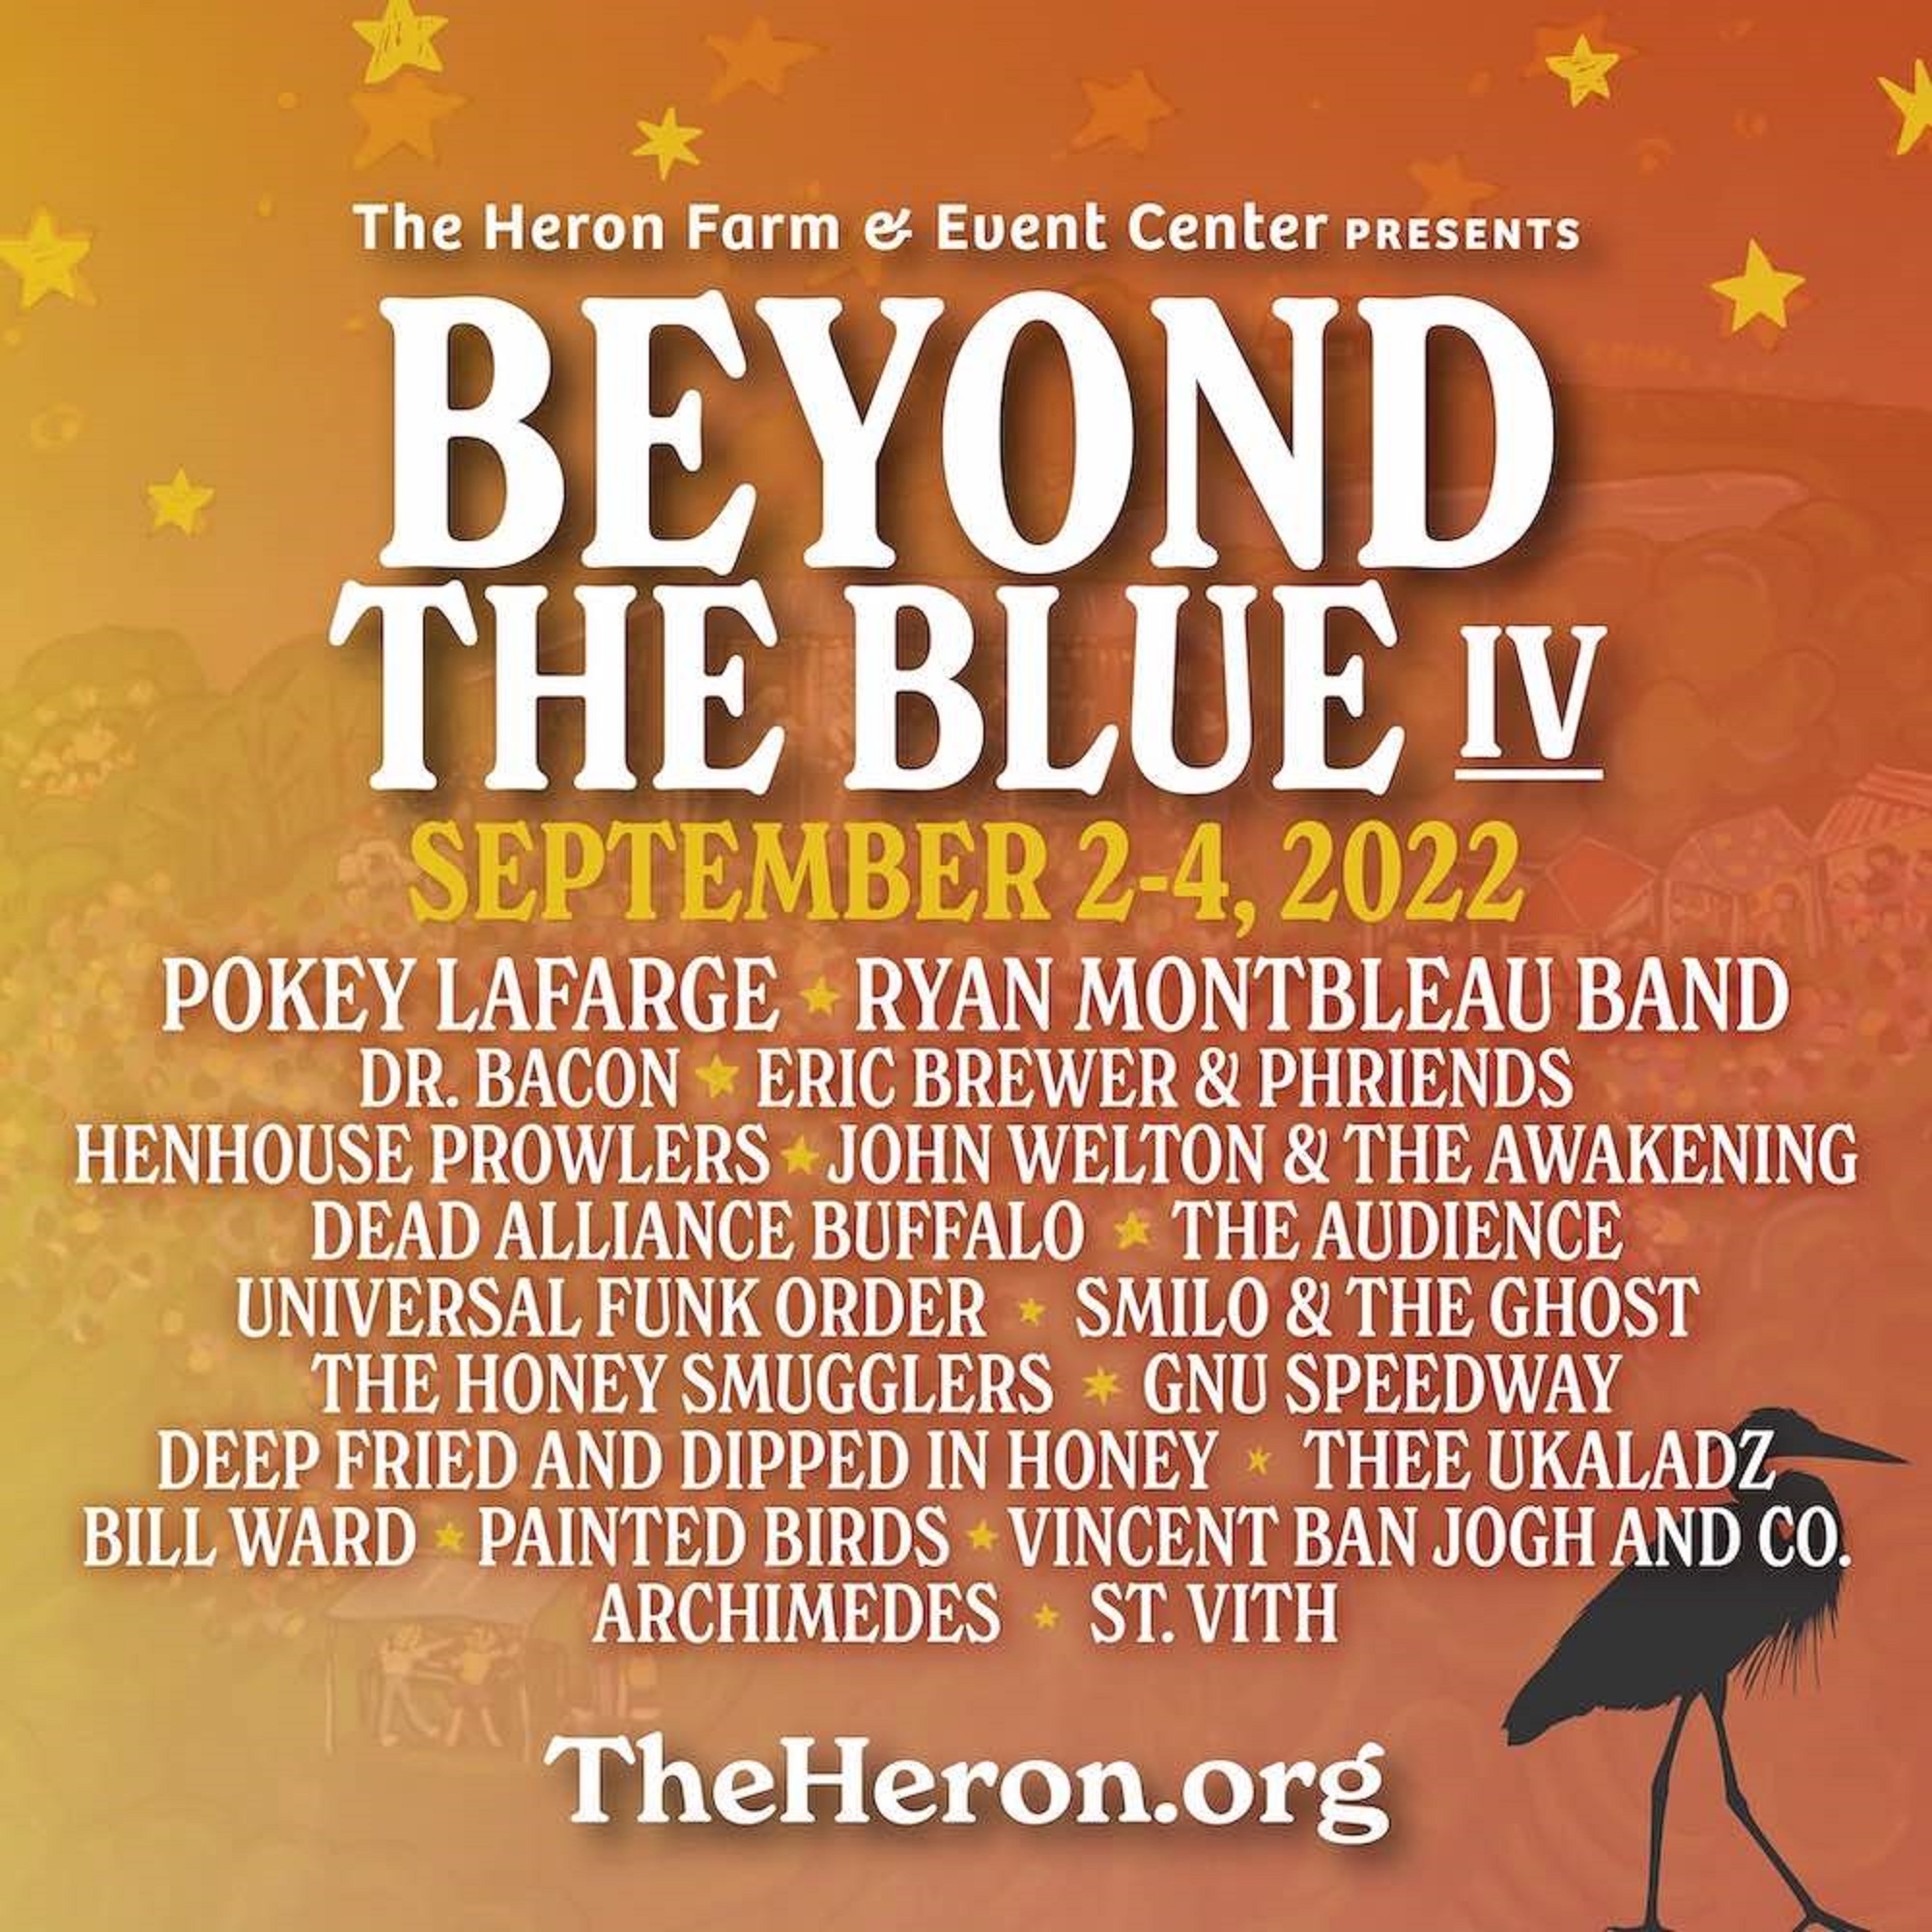 Blue Heron Festival Extends "Beyond the Blue" with Summer Series